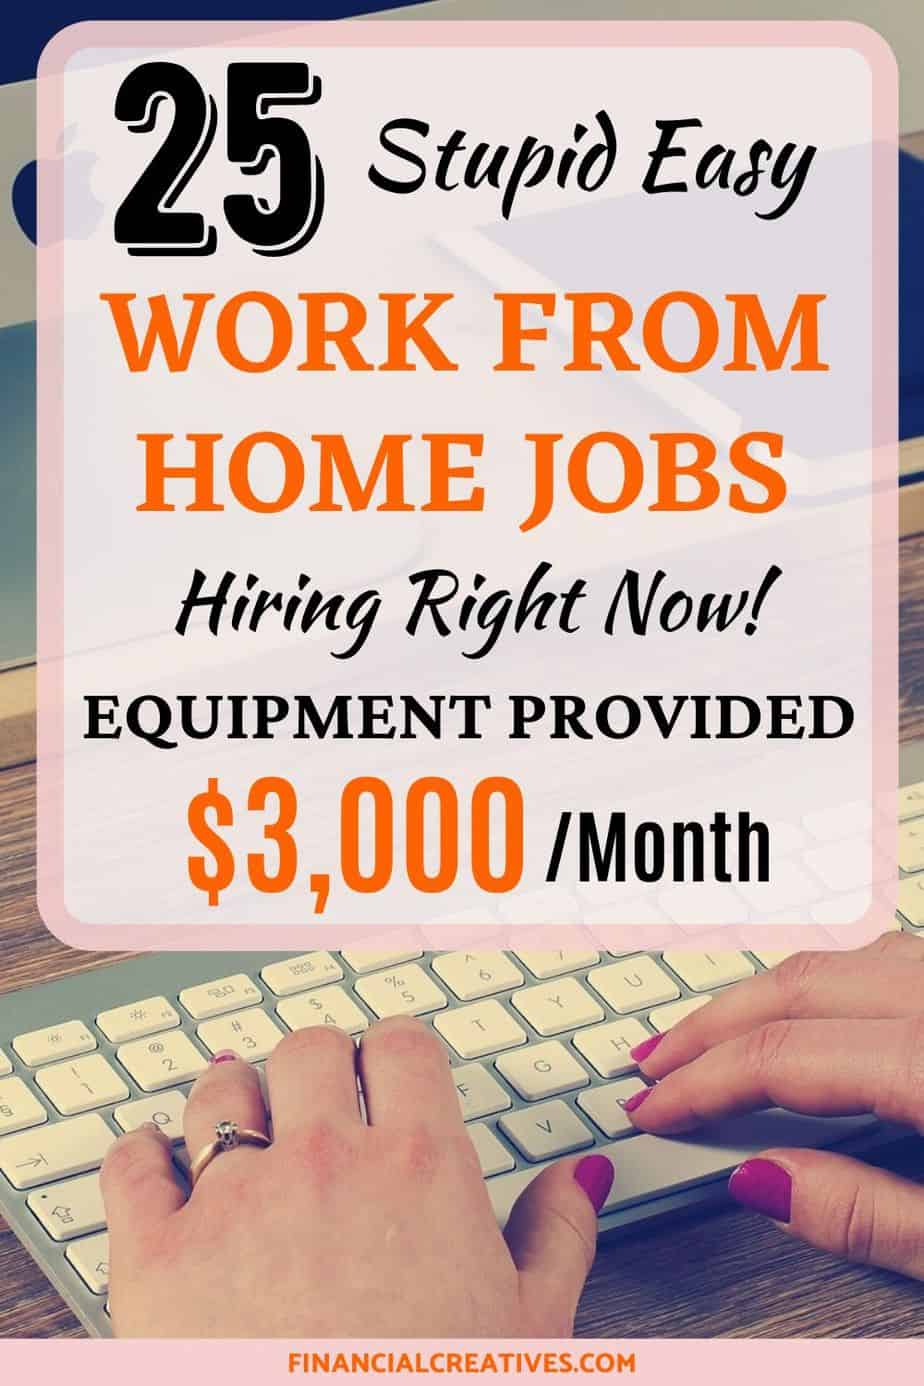 Work From Home Companies That Provide Equipment